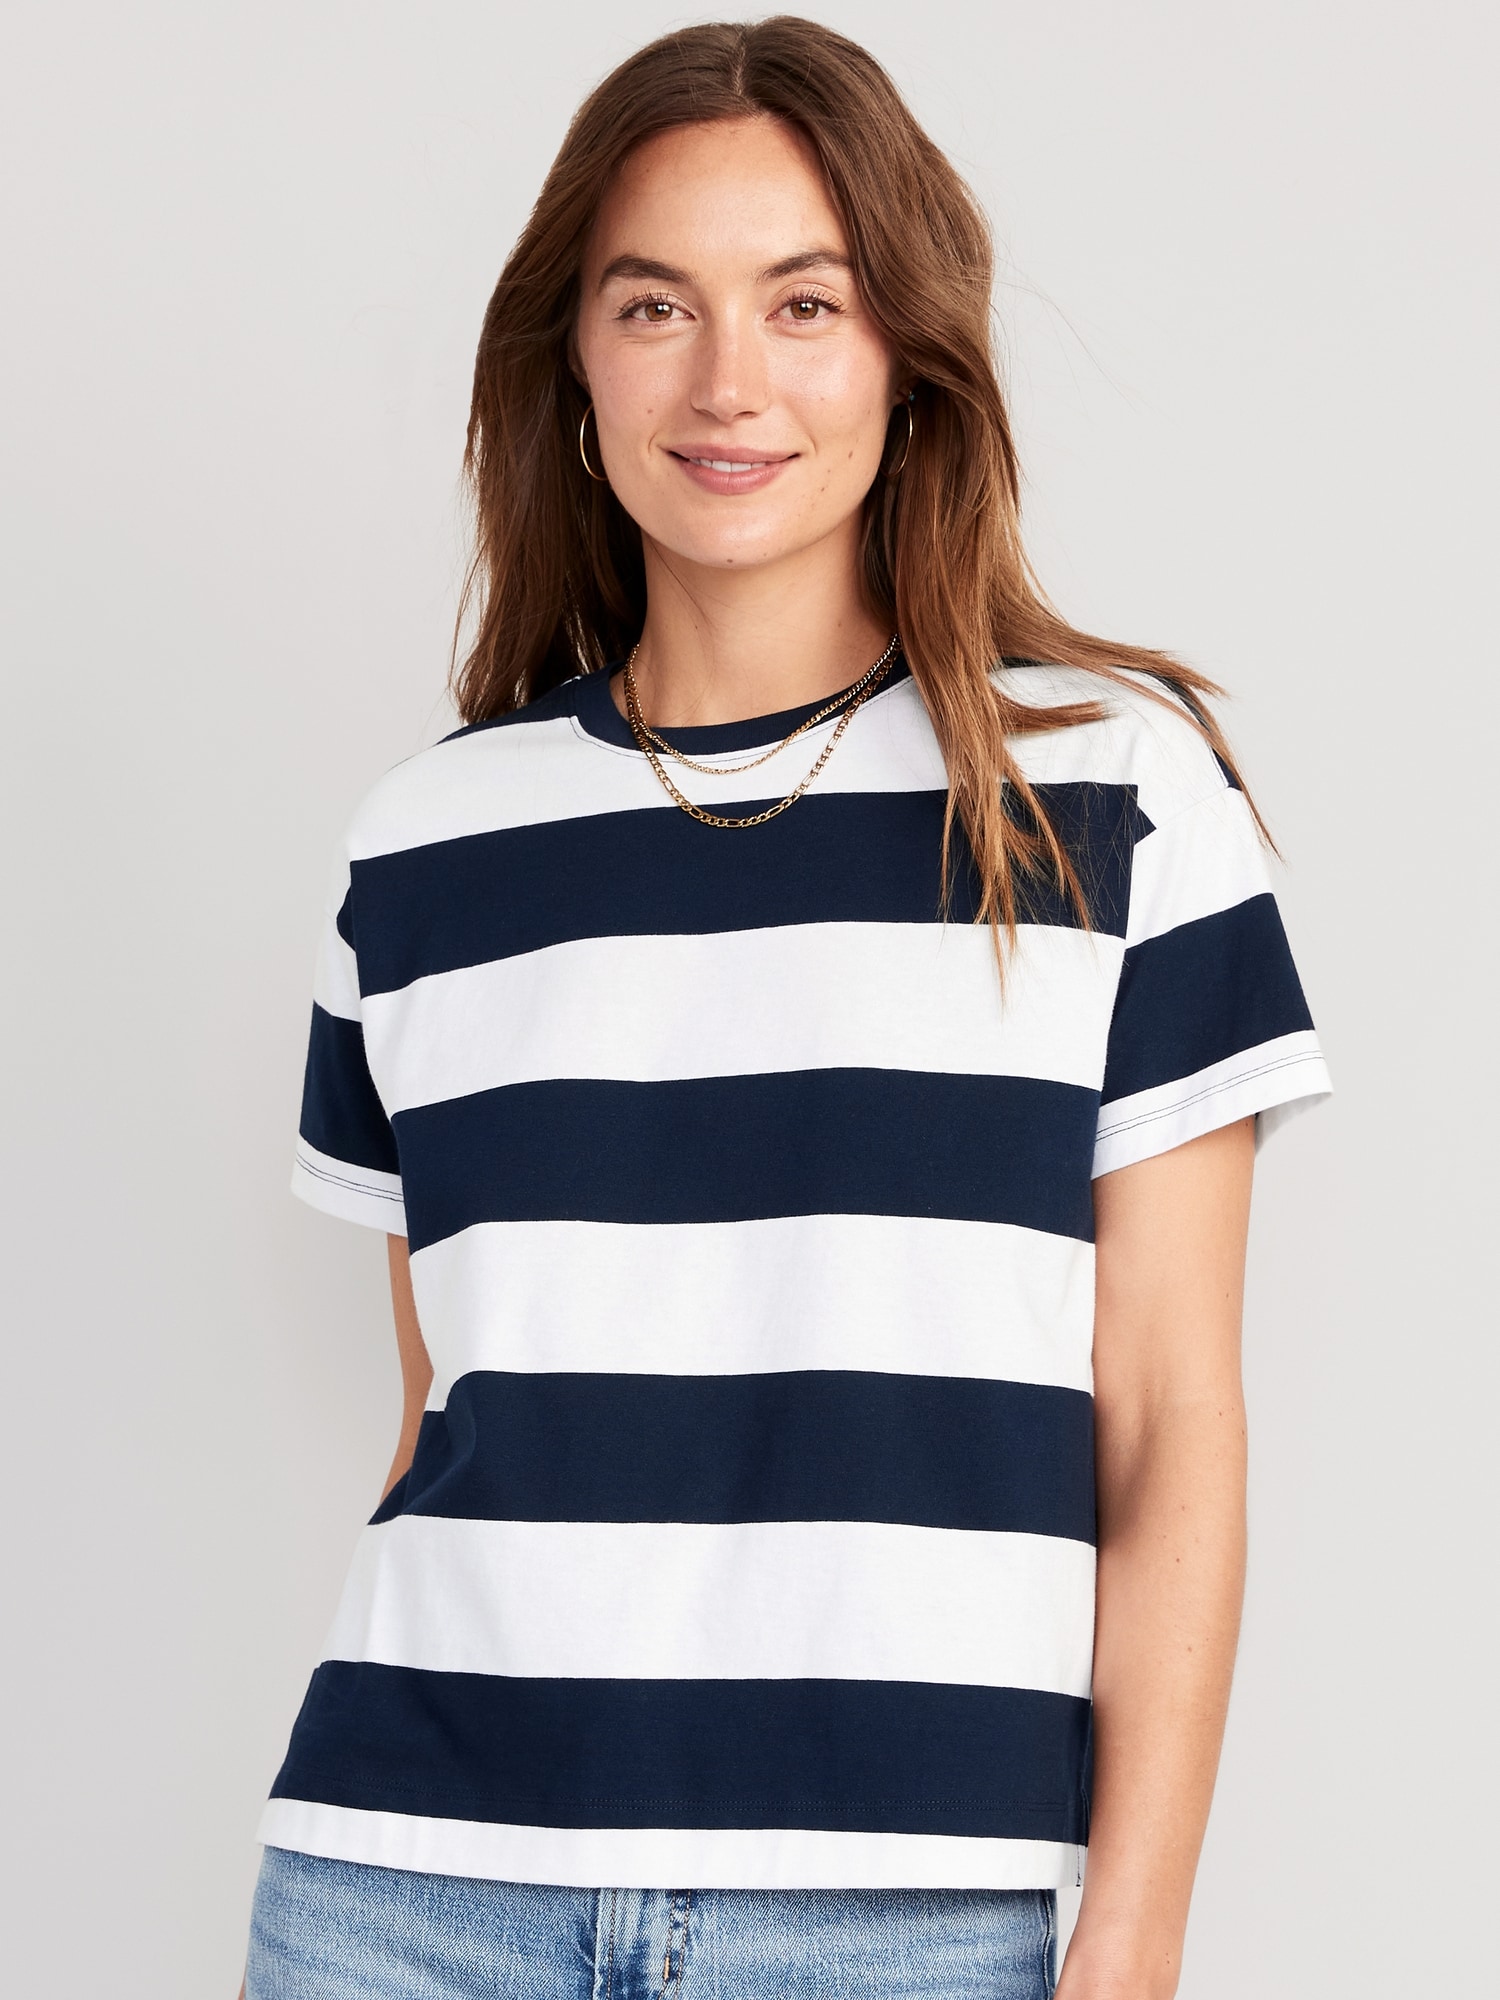 Buy Chicago Navy Oversized Striped T-Shirtfrom Maniac Life store S